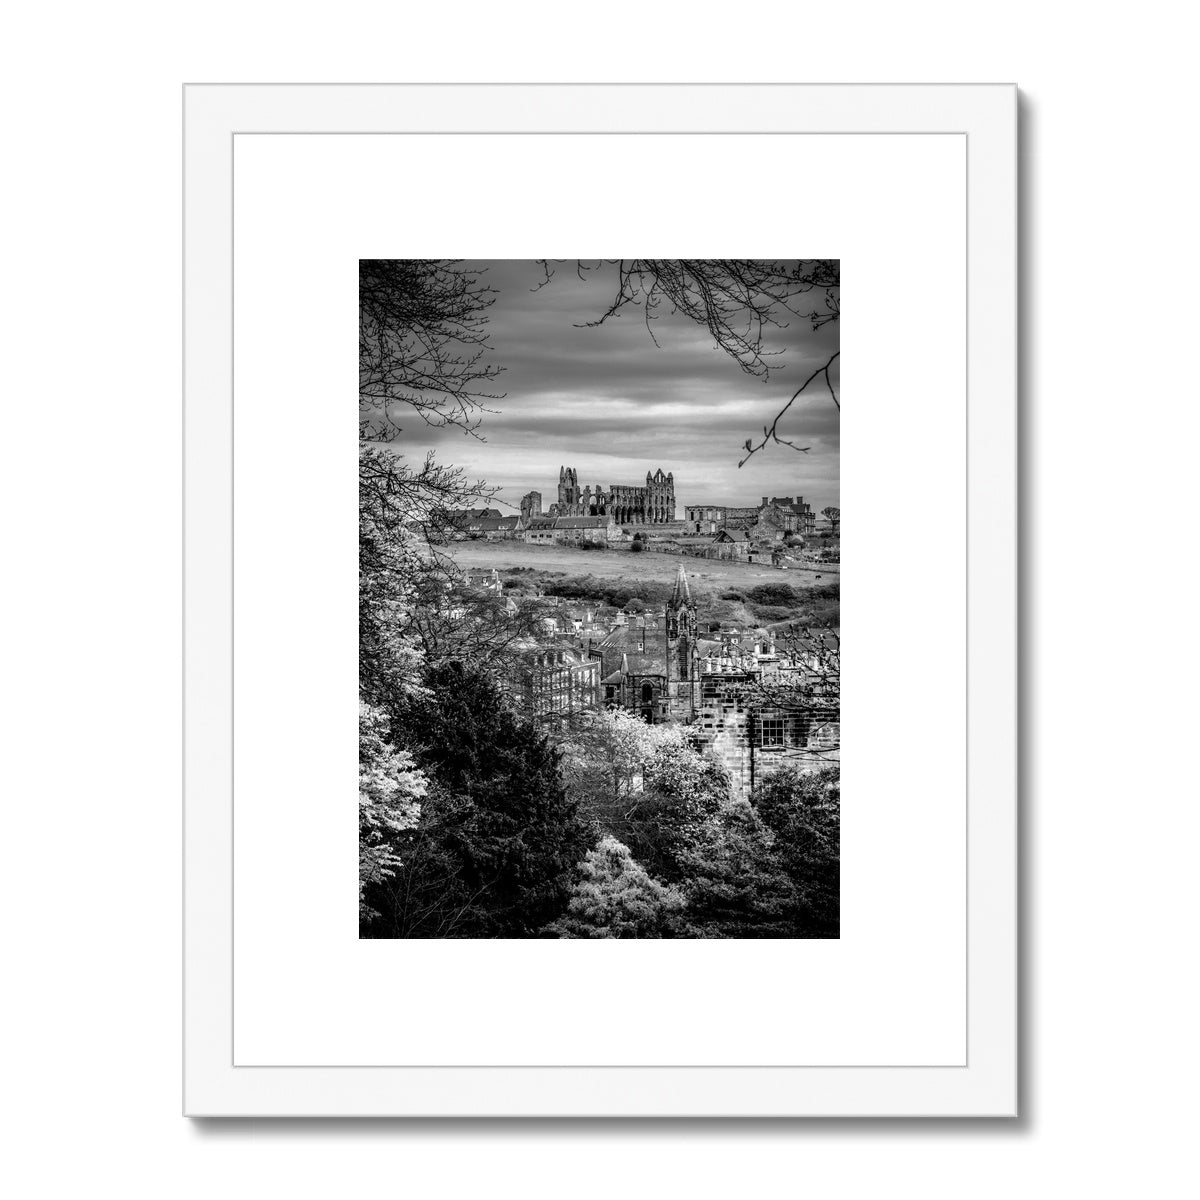 Whitby Abbey viewed from Pannett Gardens, Whitby, UK. Framed & Mounted Print